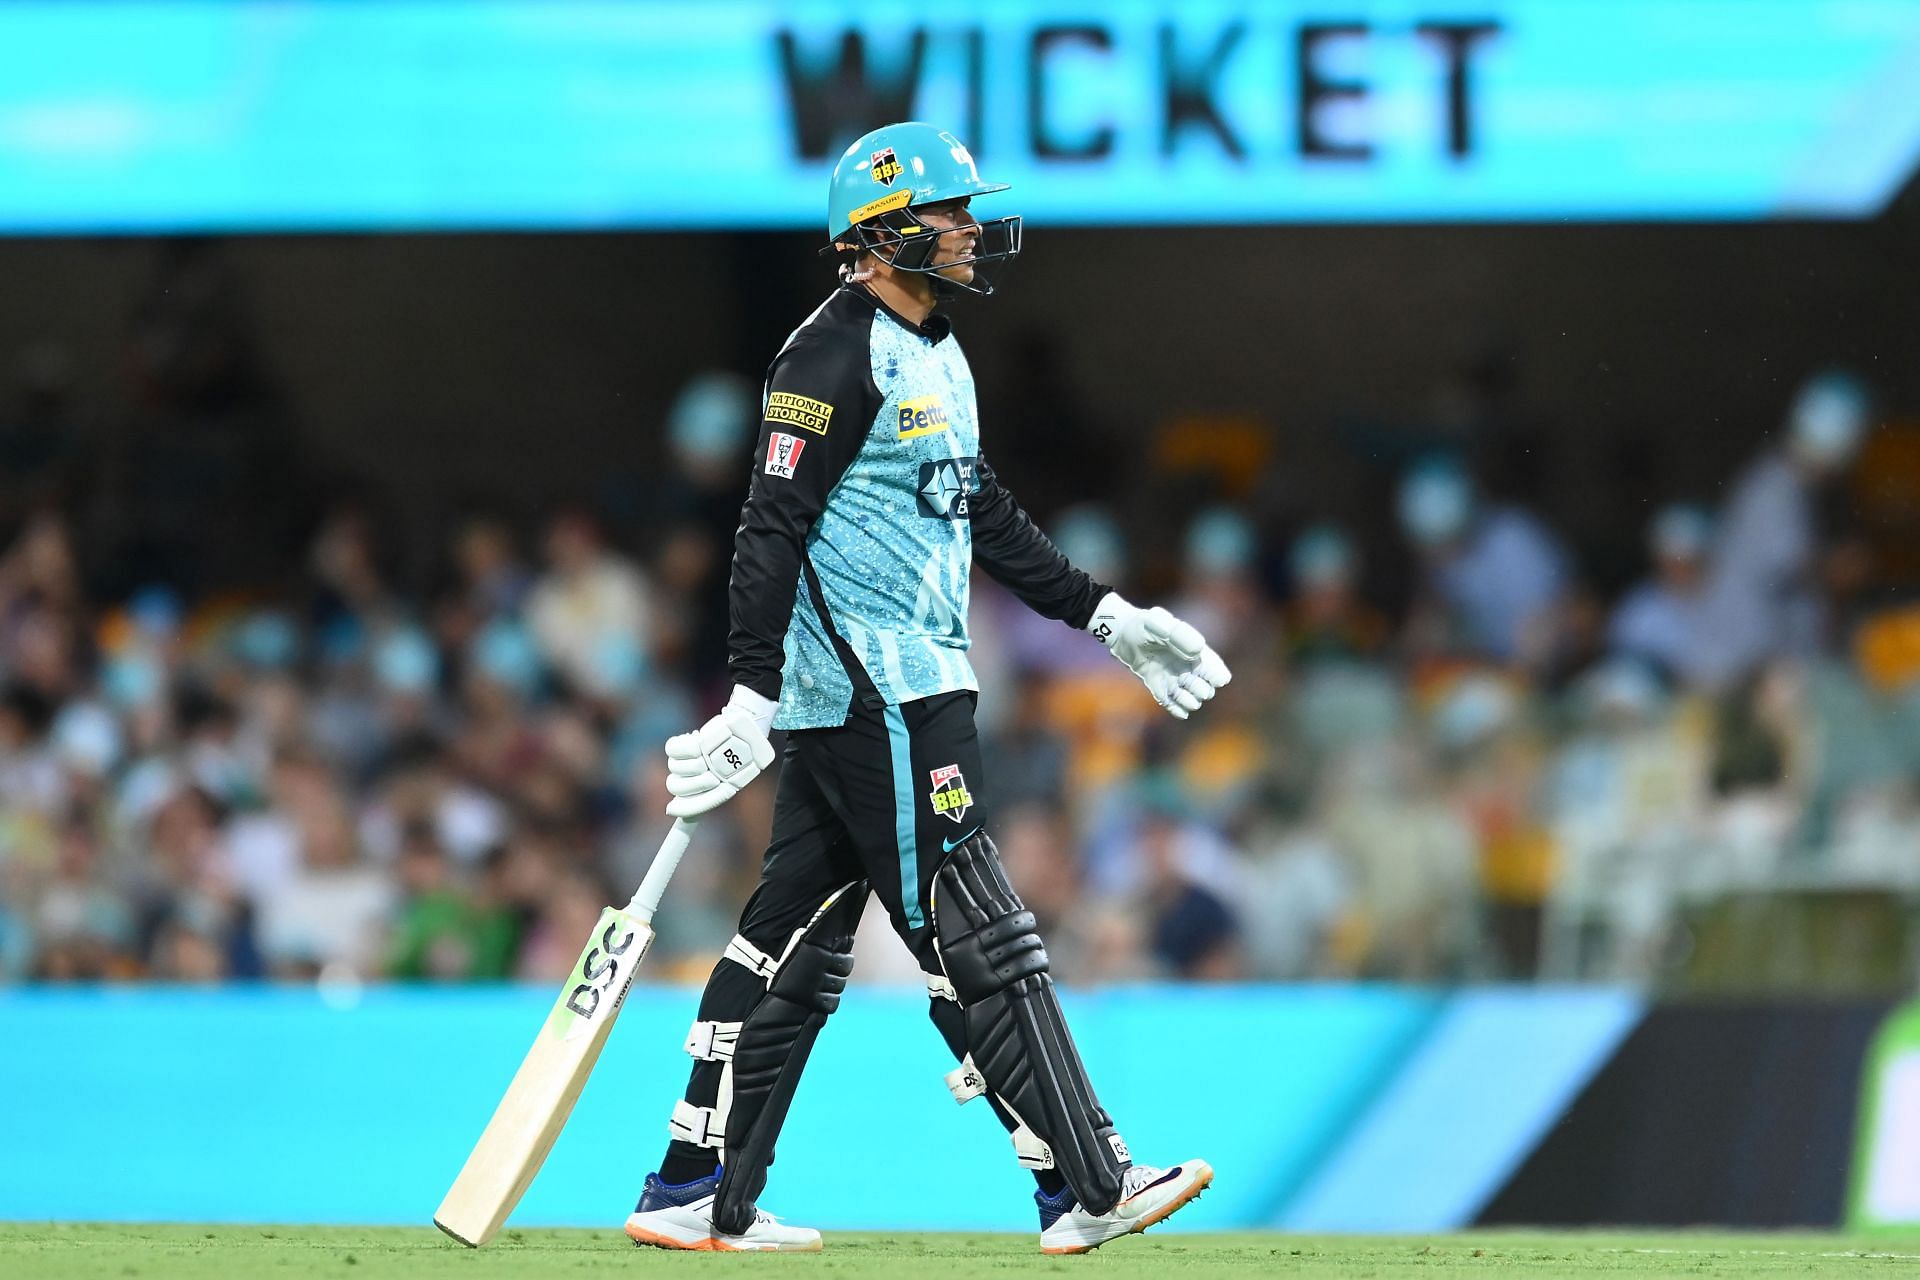 Usman Khawaja walks back after being dismissed in the BBL match. (Pic: Getty Images)